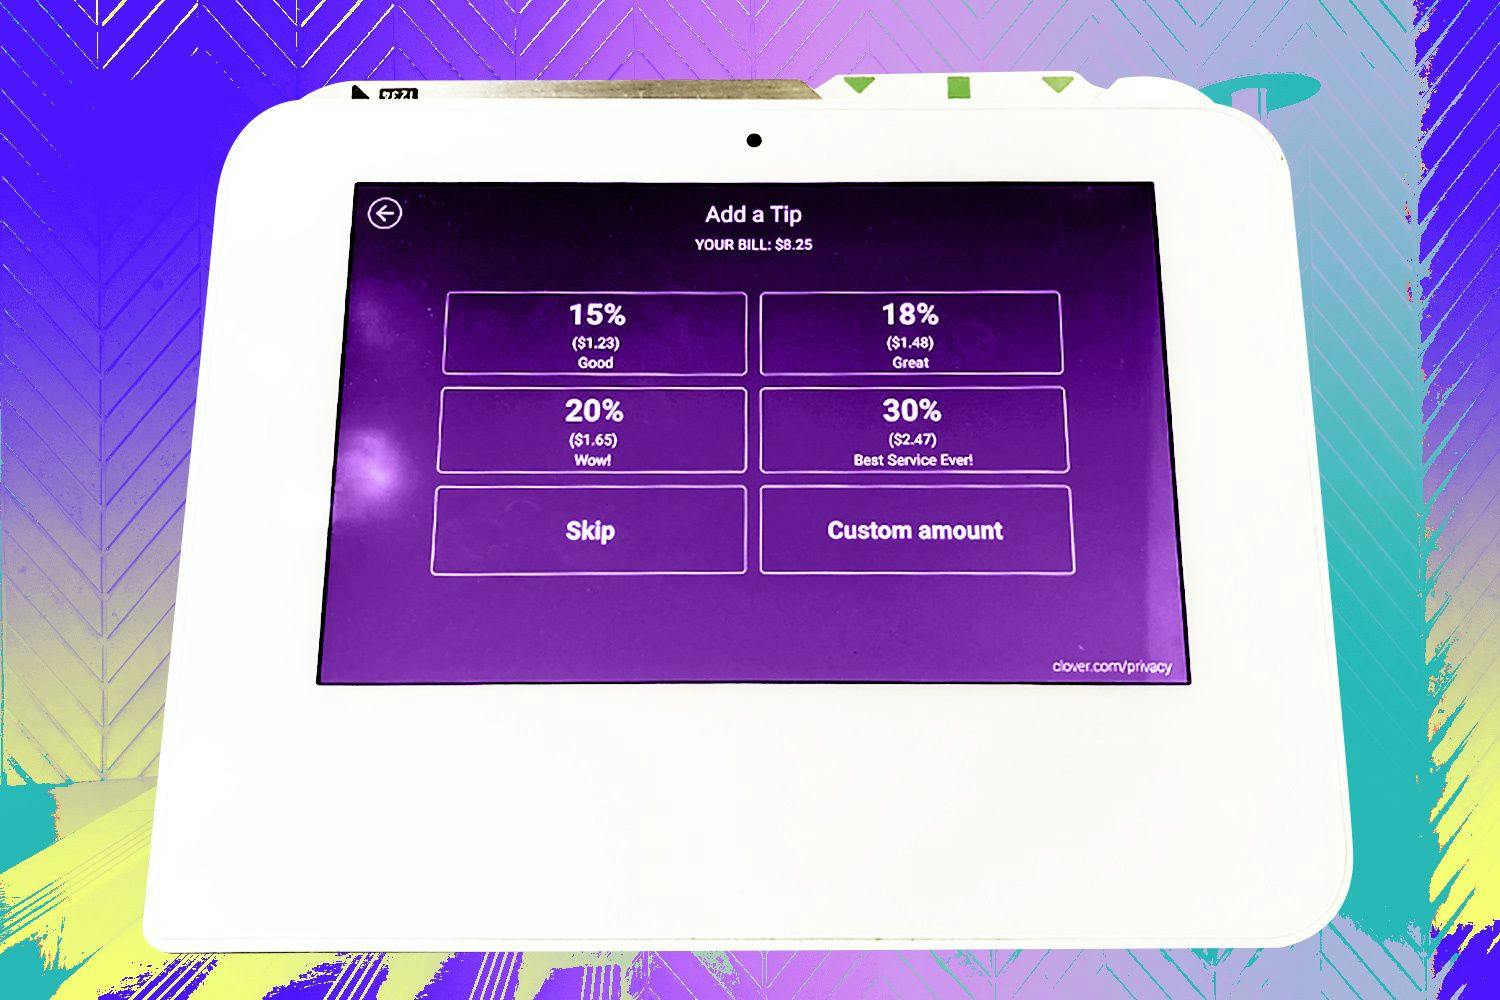 An illustration of tipping prompts on a tablet payment screen, with tips ranging from 155 to 30% and options to skip or add a custom amount. 